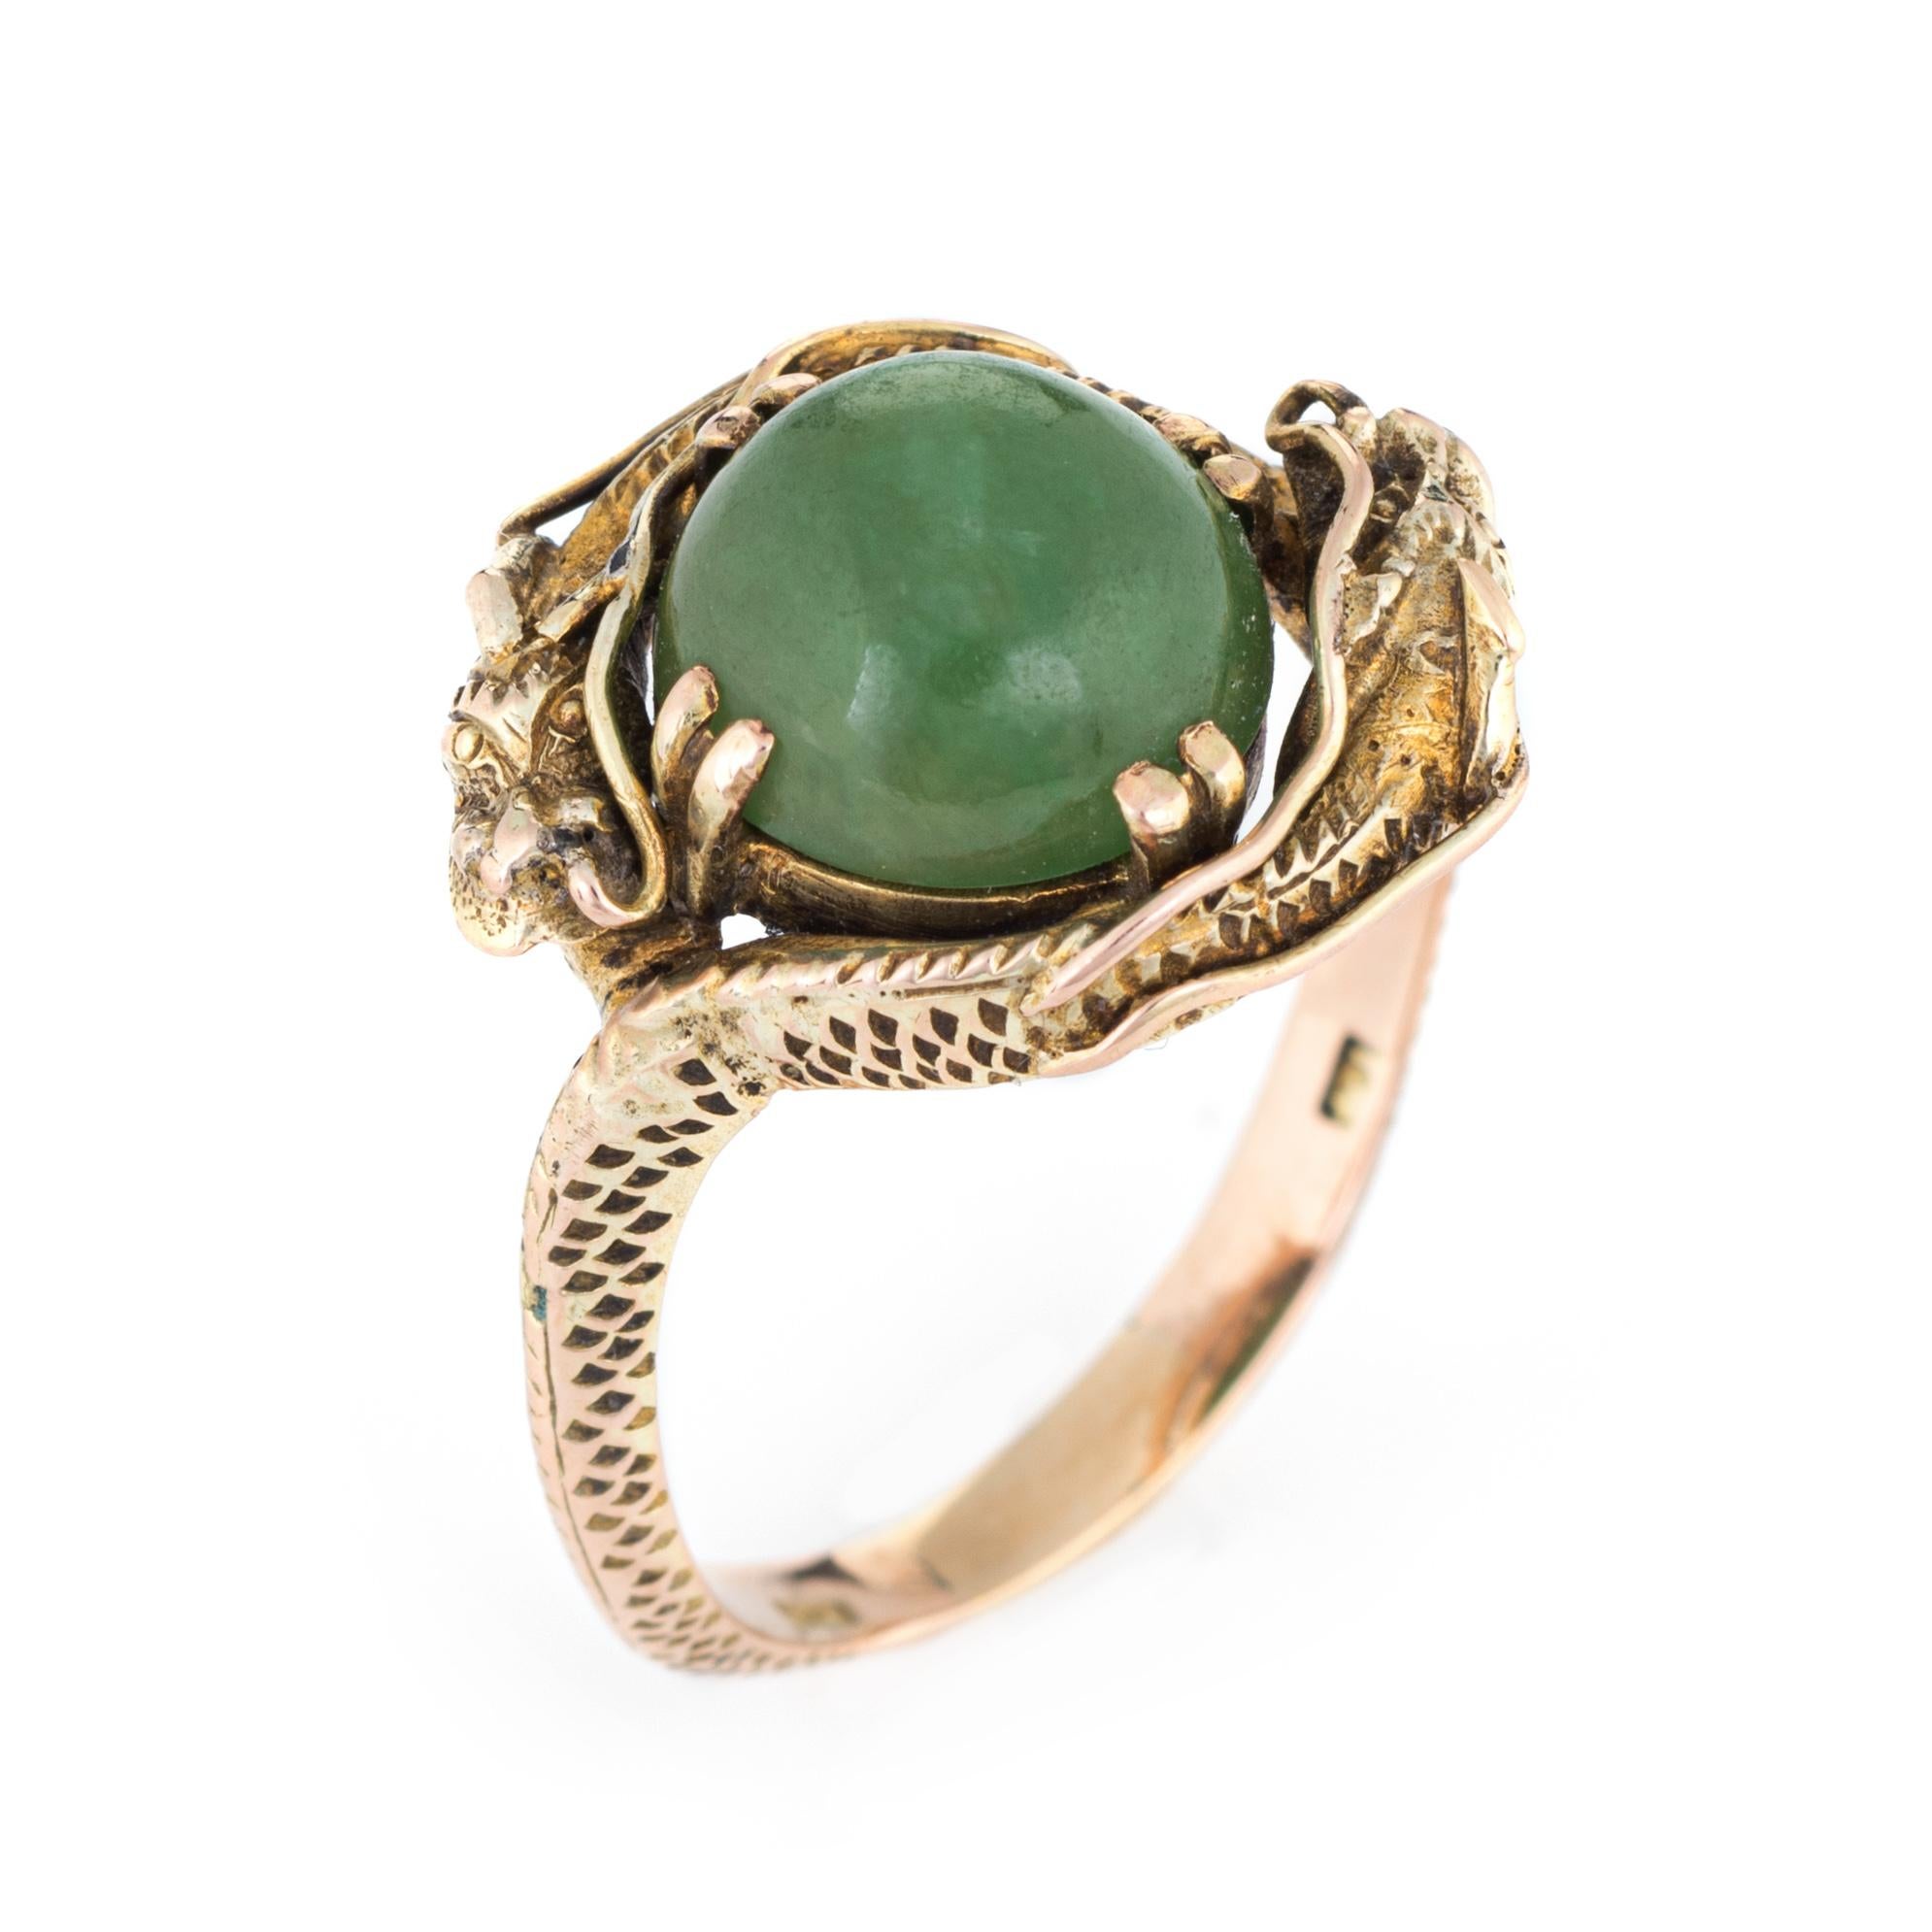 Finely detailed vintage double dragon ring (circa 1960s to 1970s), crafted in 14 karat yellow gold. 

Green jade is cabochon cut and measures 9mm (estimated at 3.25 carats). The jade is in excellent condition and free of cracks or chips. 

The ring